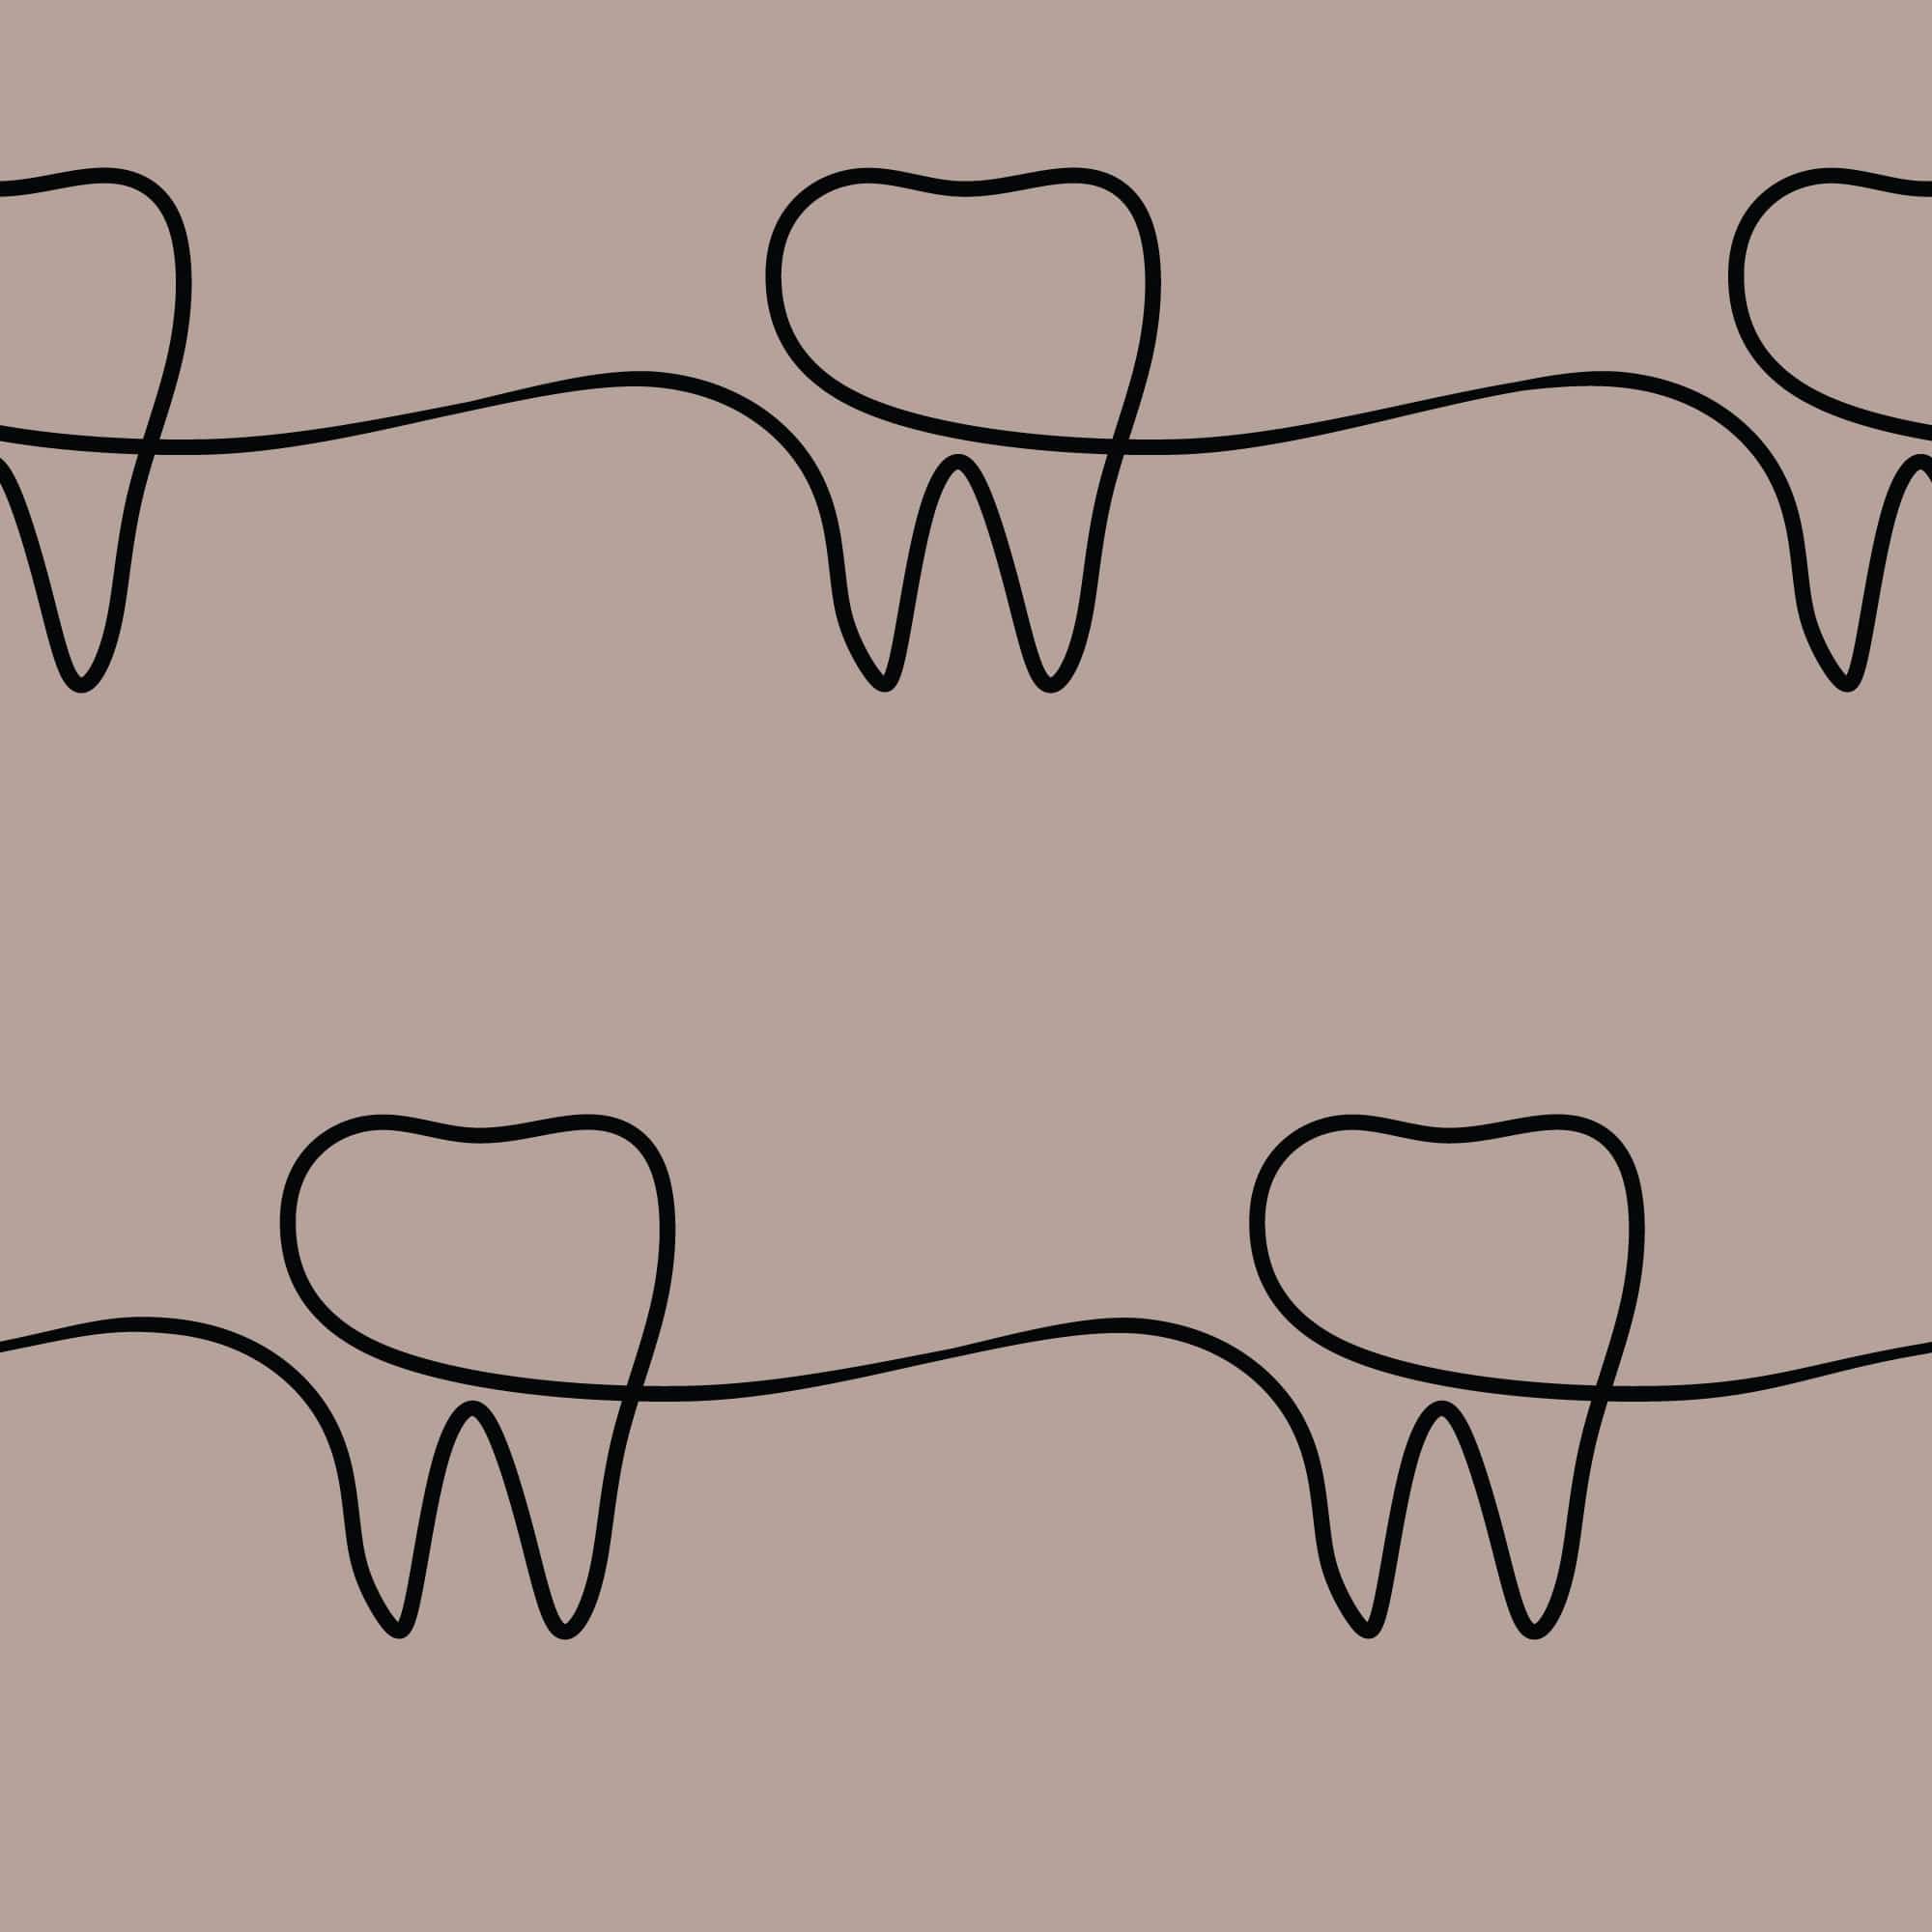 A line drawing of teeth on brown background - Dentist